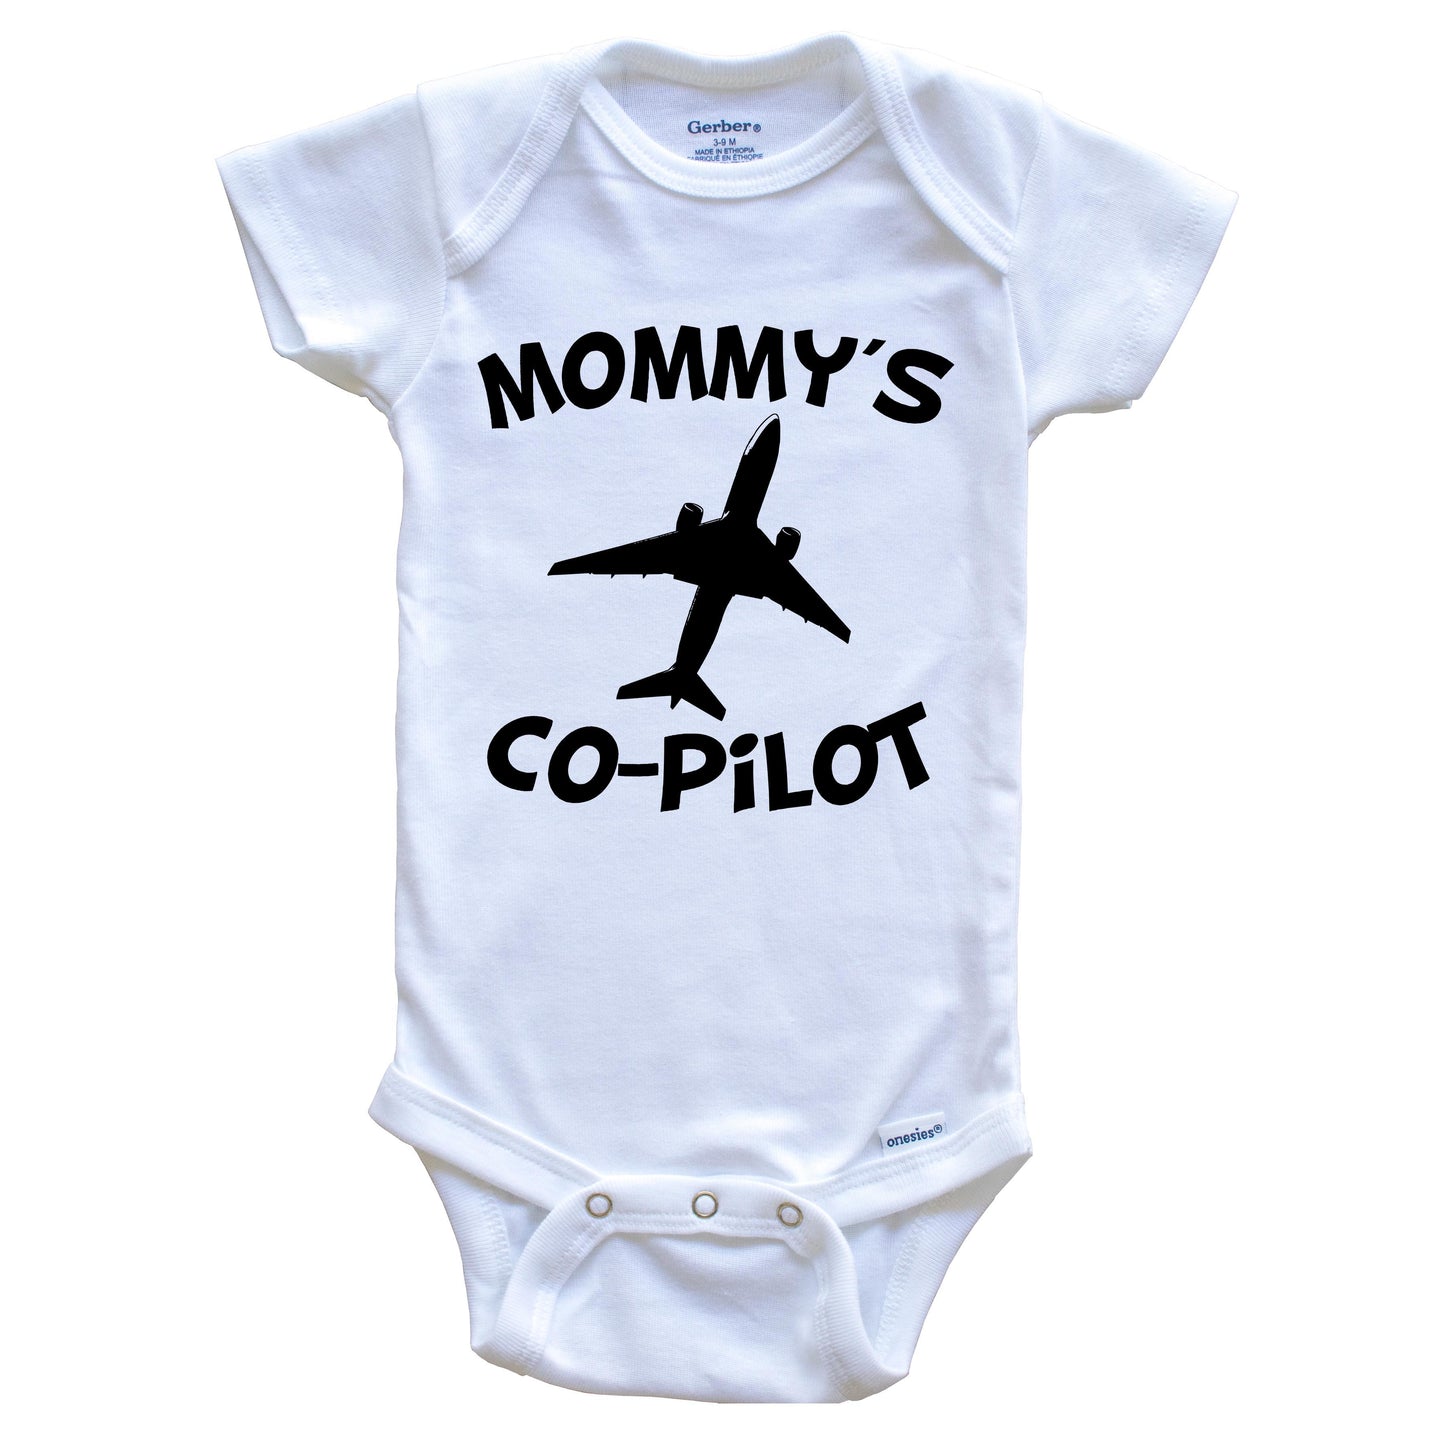 Mommy's Co-Pilot Cute Airplane Baby Onesie